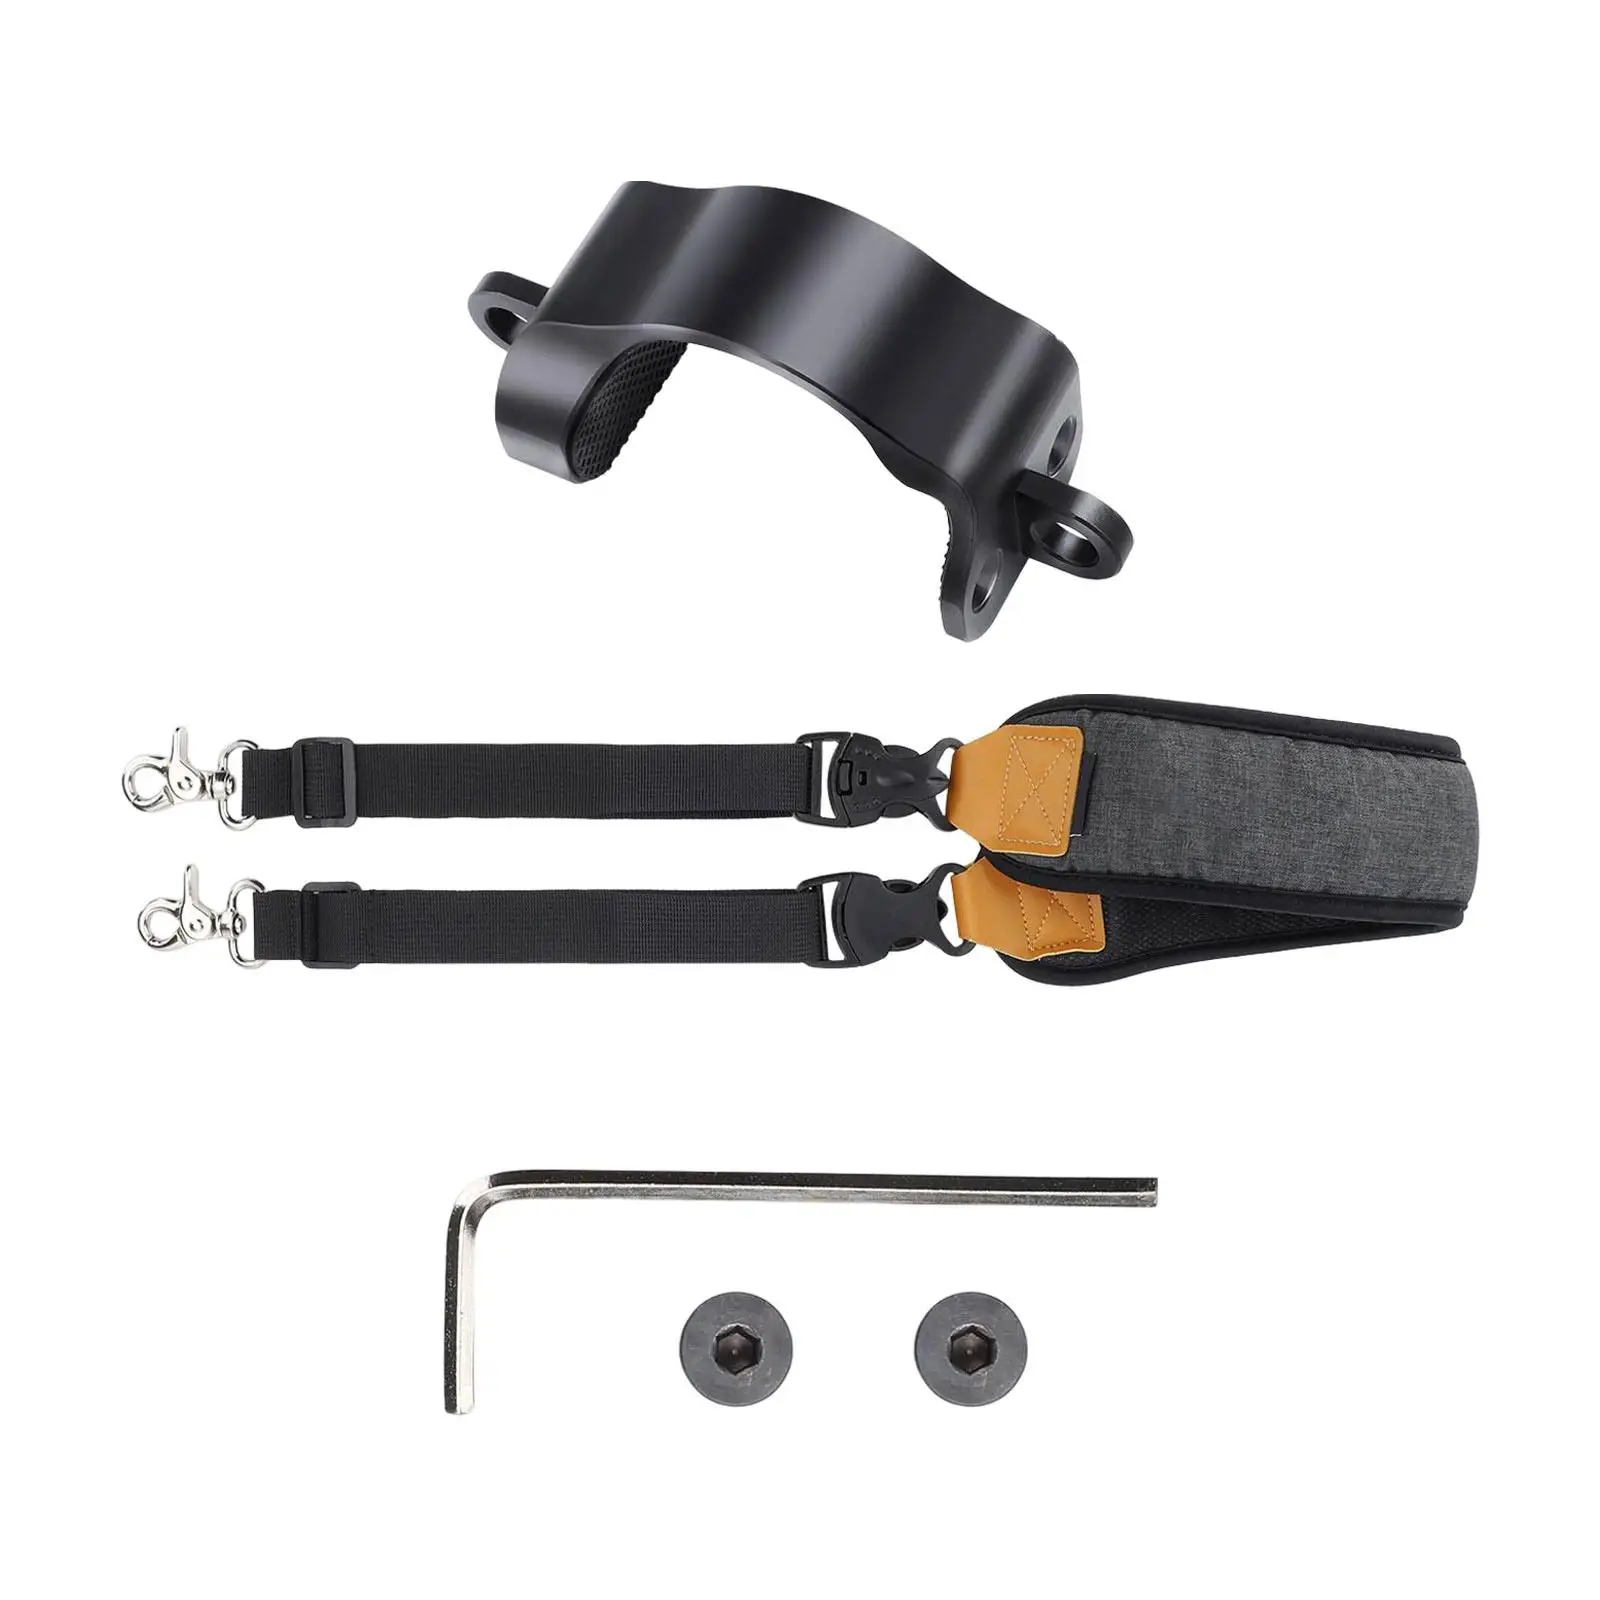 Adjustable Gimbal Stabilizer Lanyard Neck Strap Replacement Accessories Strong Load Bearing Nylon Braided Black for RS3 Mini